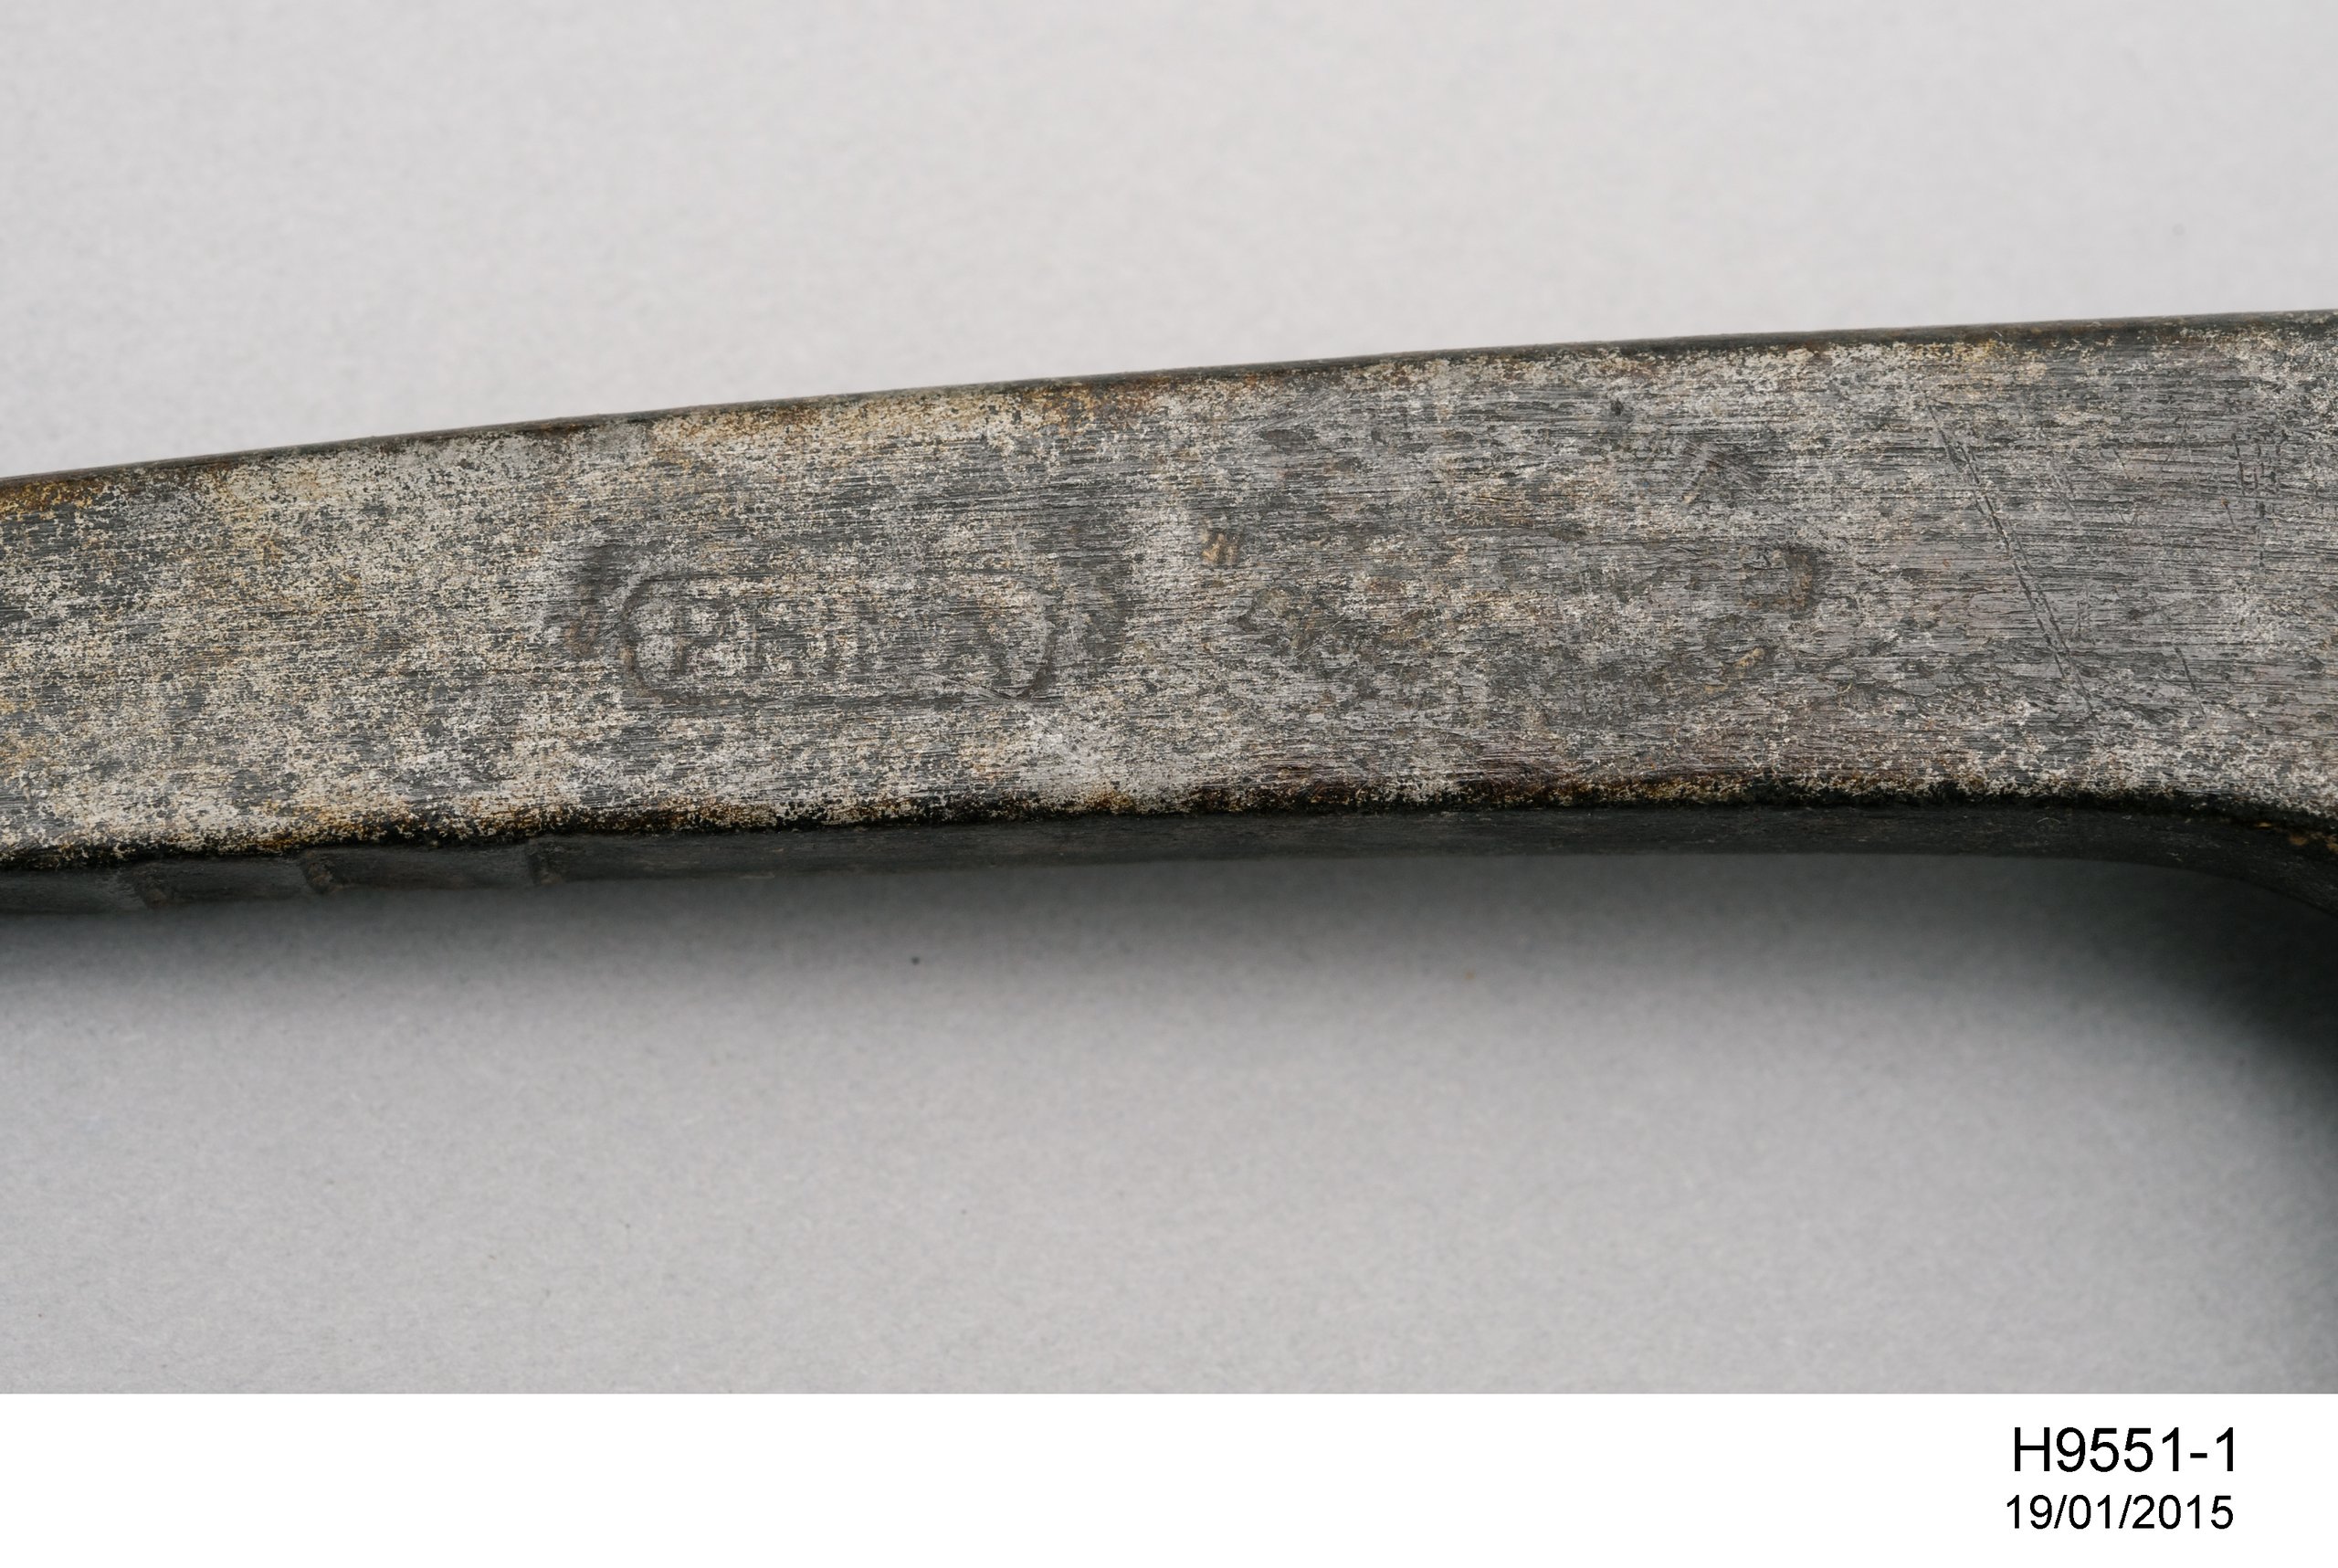 Ice axe used during Sir Dougas Mawson's Australasian Antartic Expedition